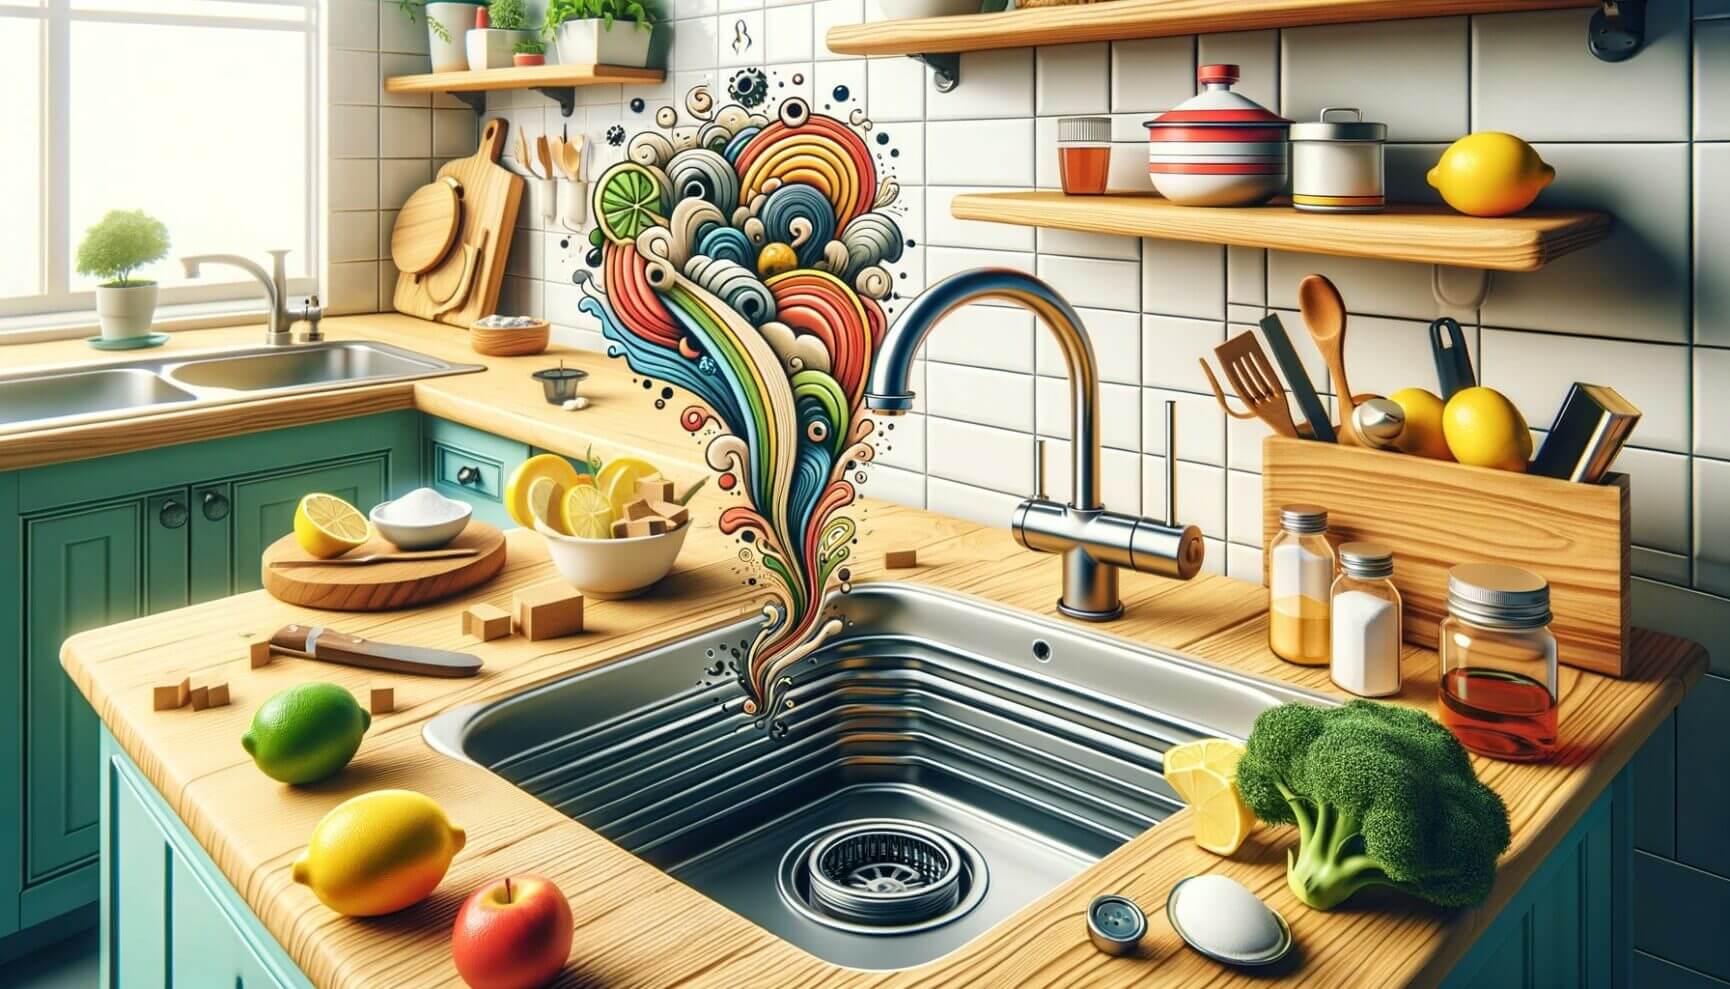 An image of a kitchen with a colorful sink.